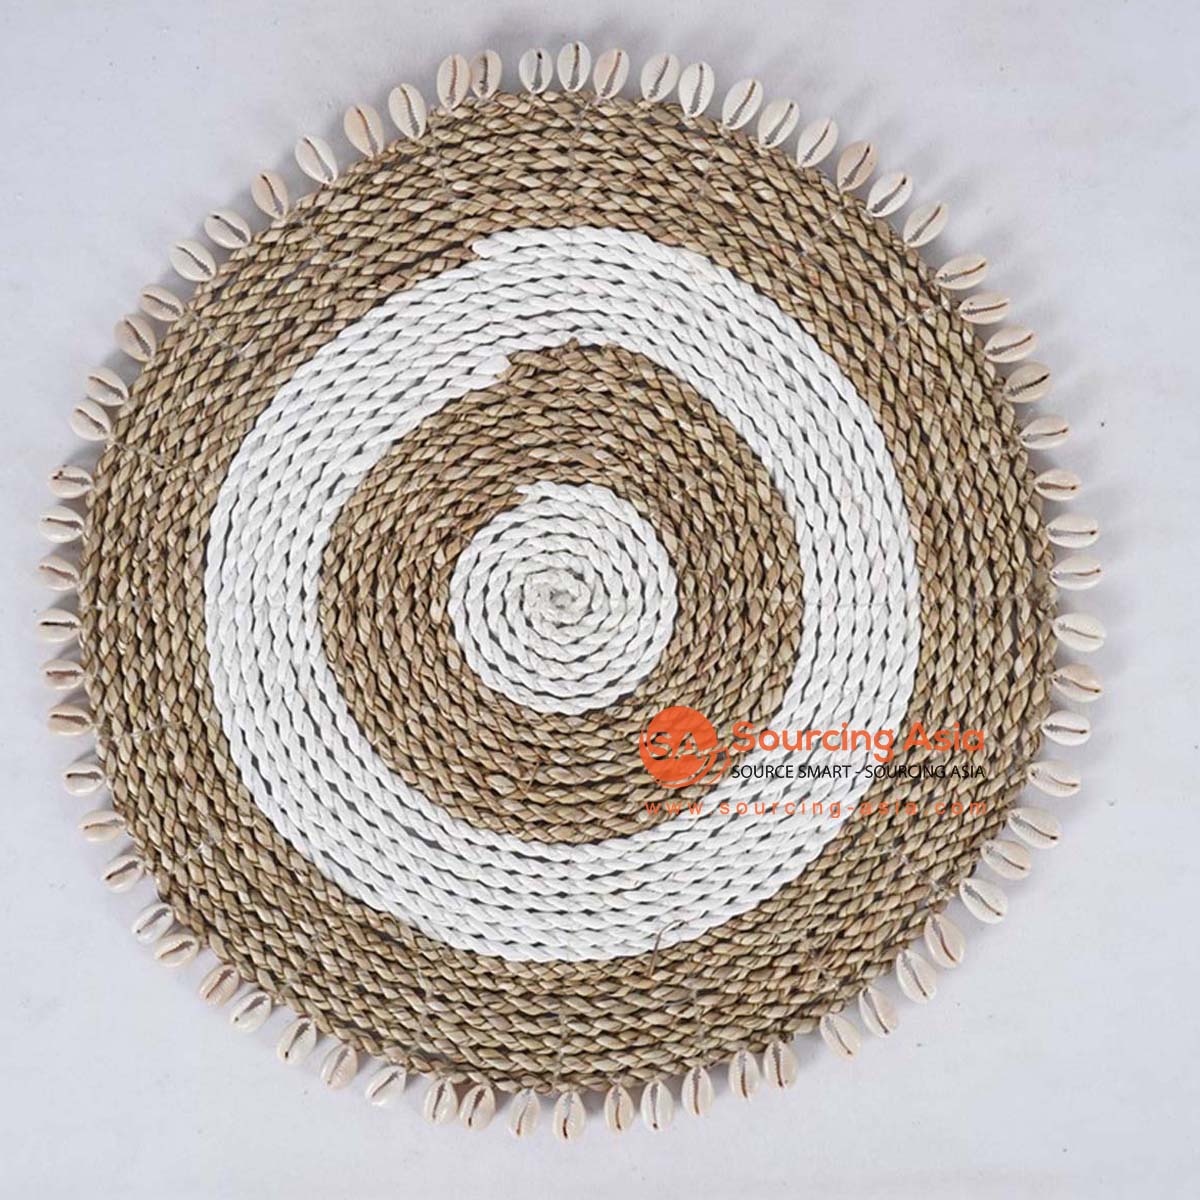 HBSC565-2 NATURAL AND WHITE PANDANUS ROUND PLACEMAT WITH SHELL EDGE